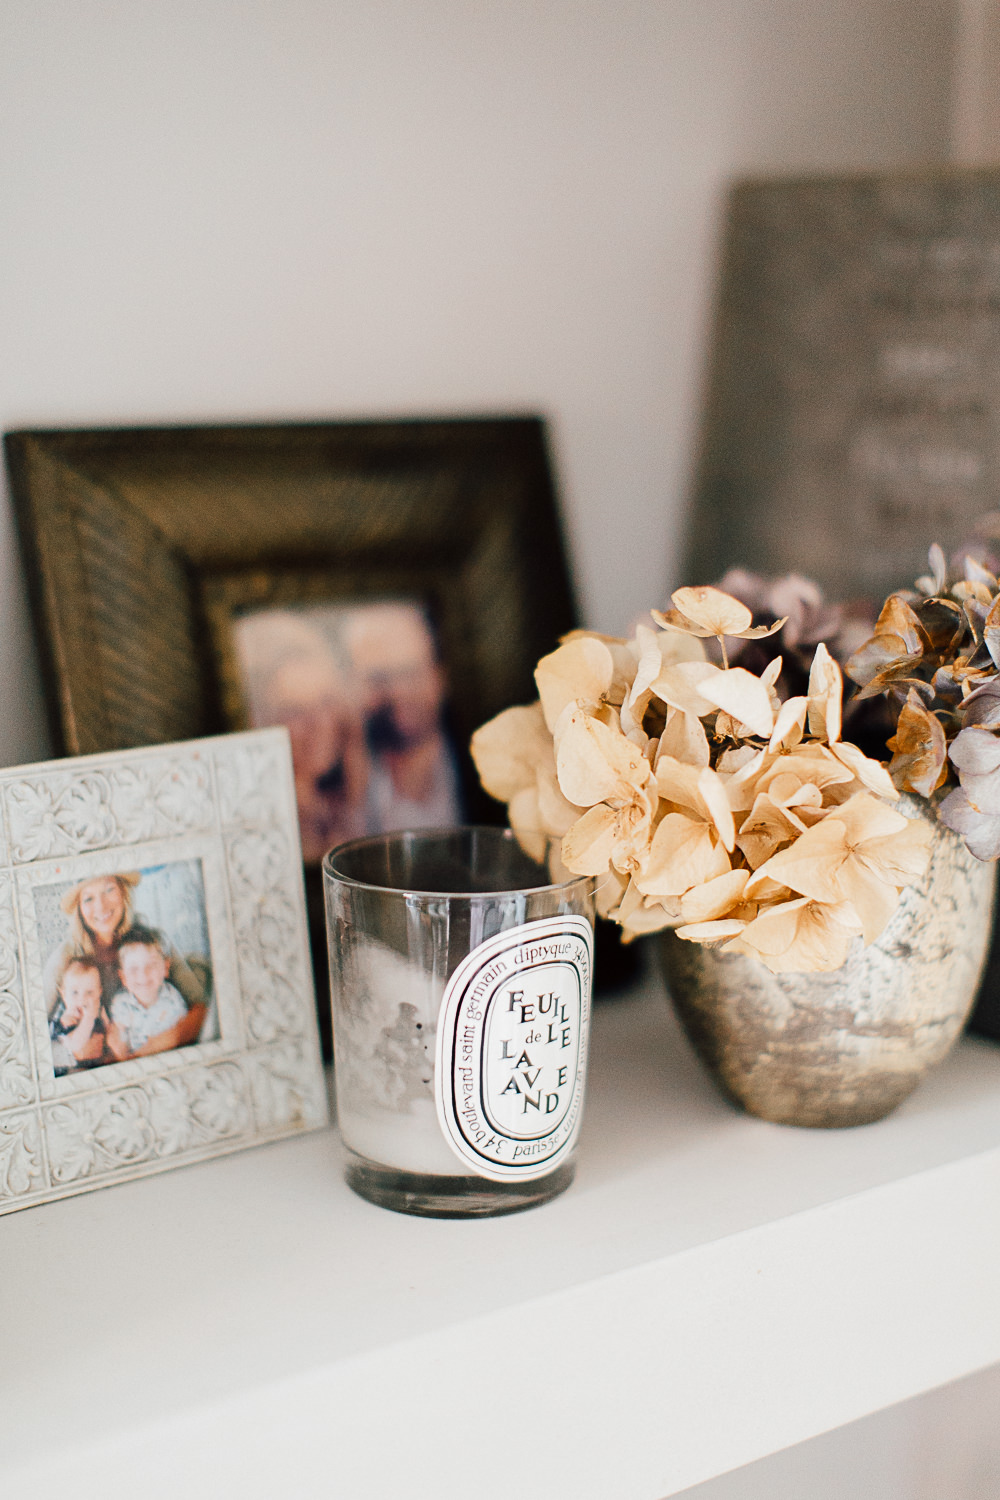 Framed photos and dried flowers